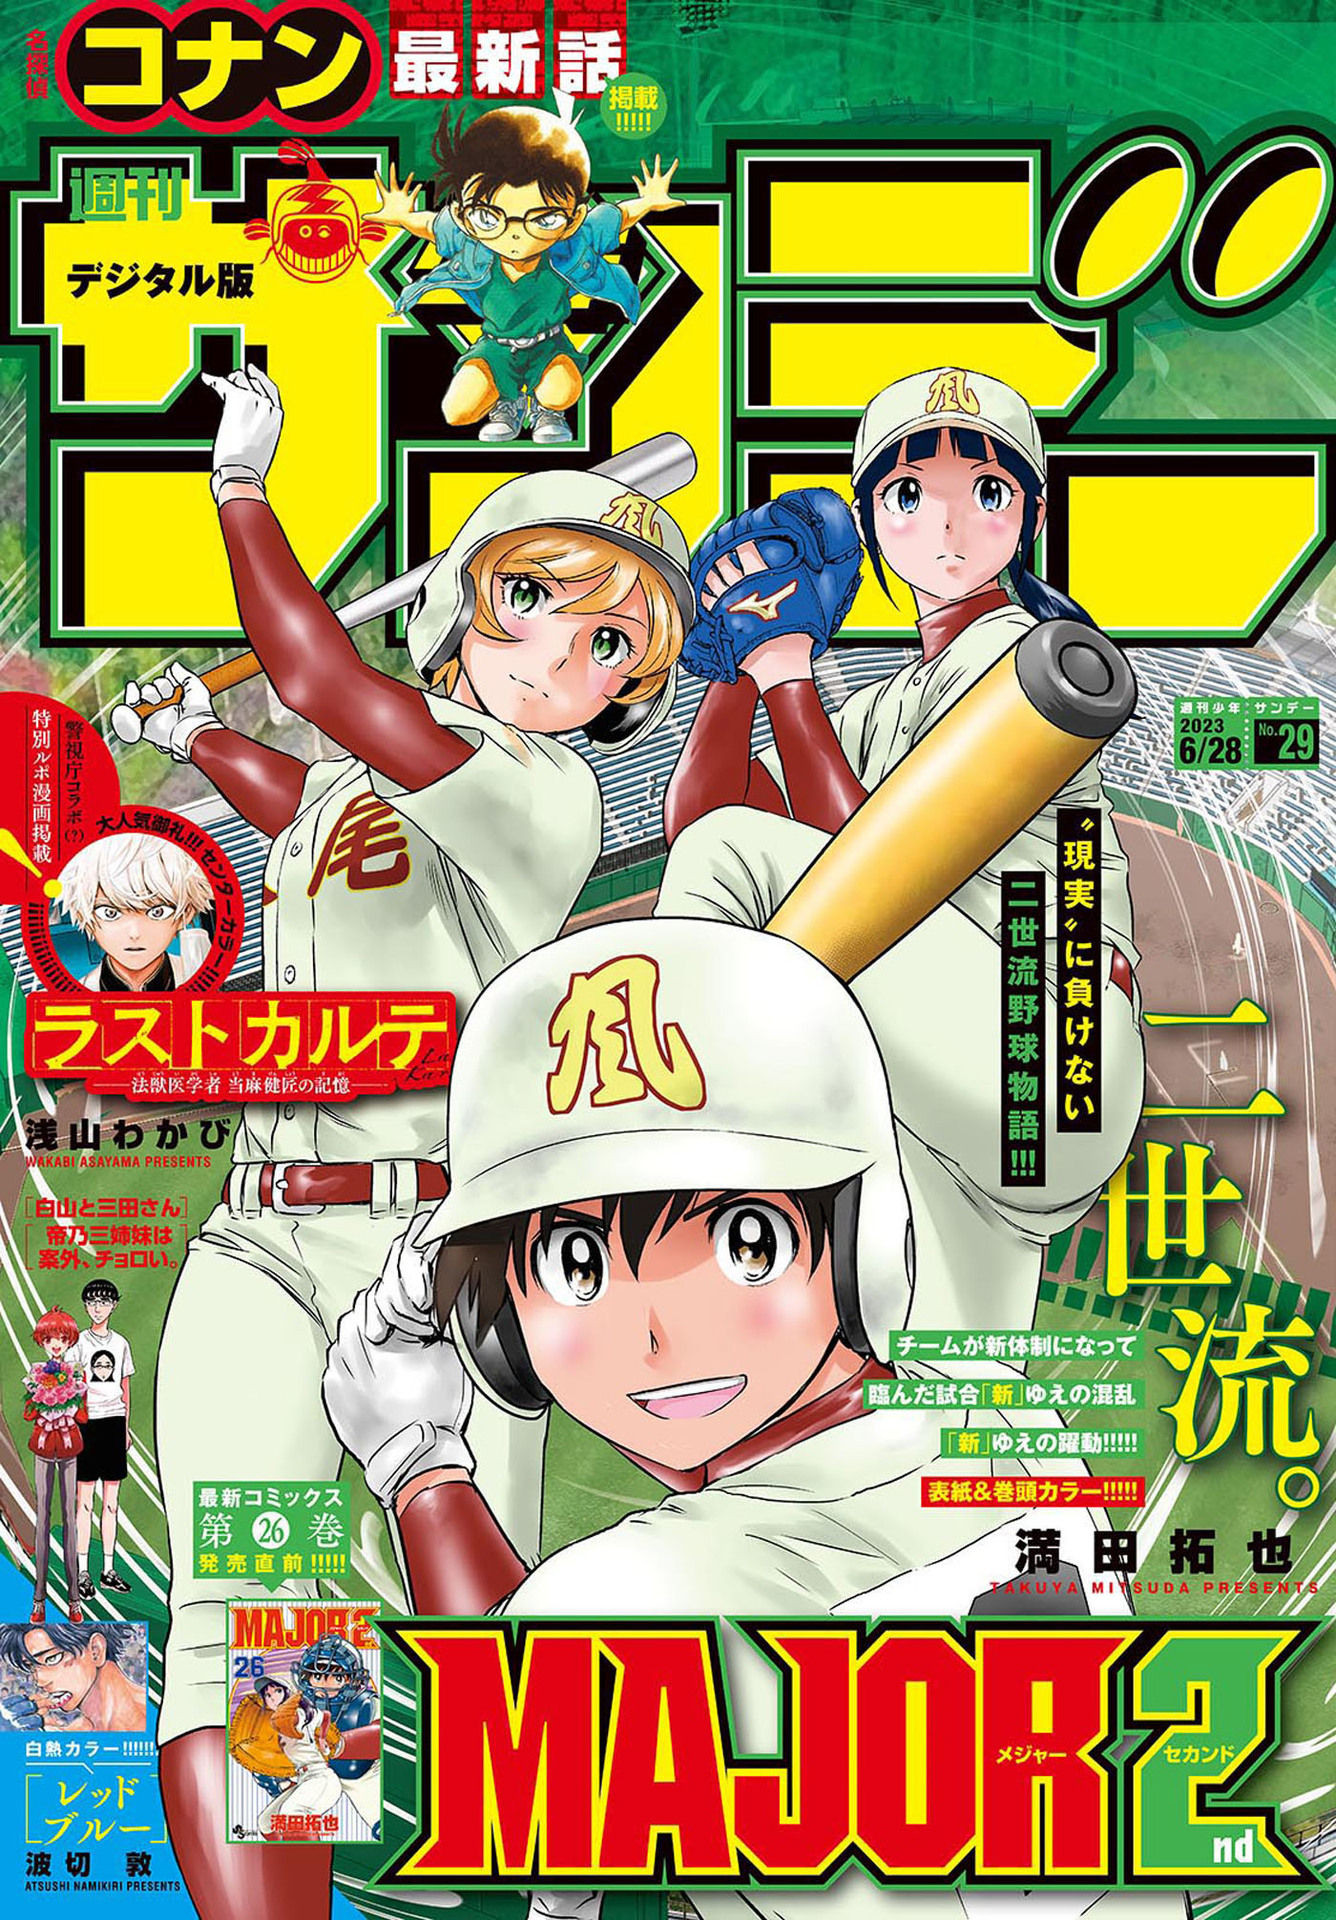 Weekly Shōnen Sunday - 週刊少年サンデー - Chapter 2023-29 - Page 1